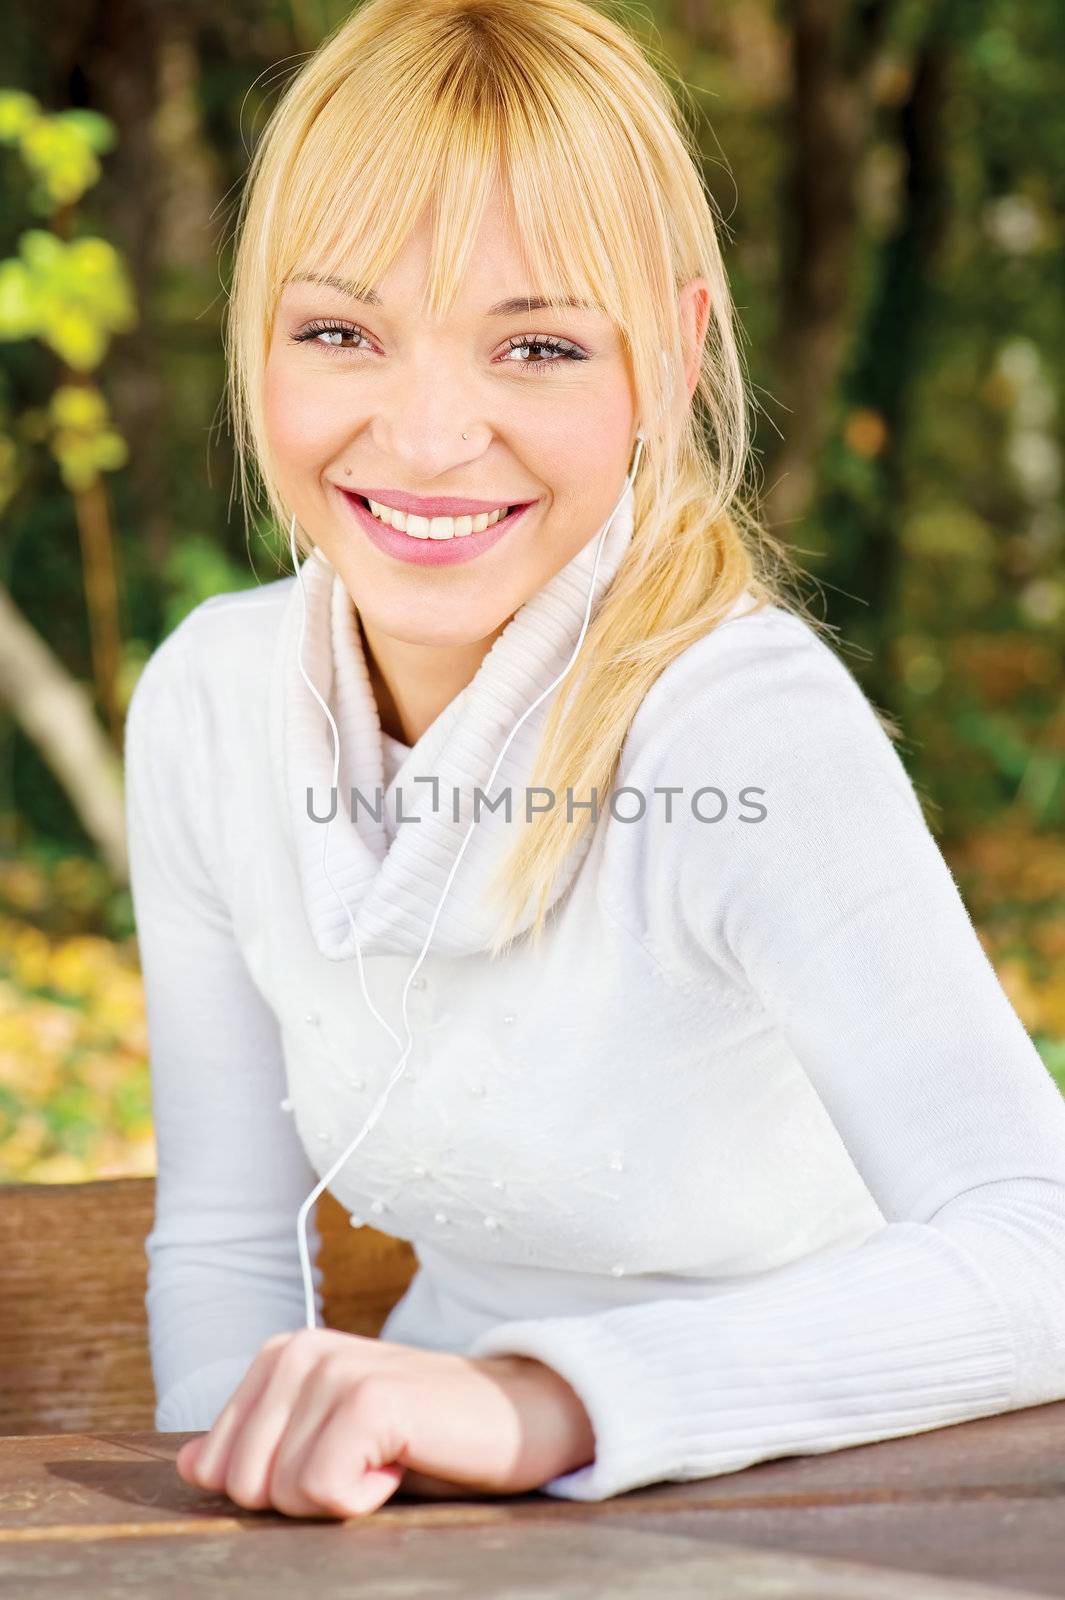 Blond woman with headphones in park